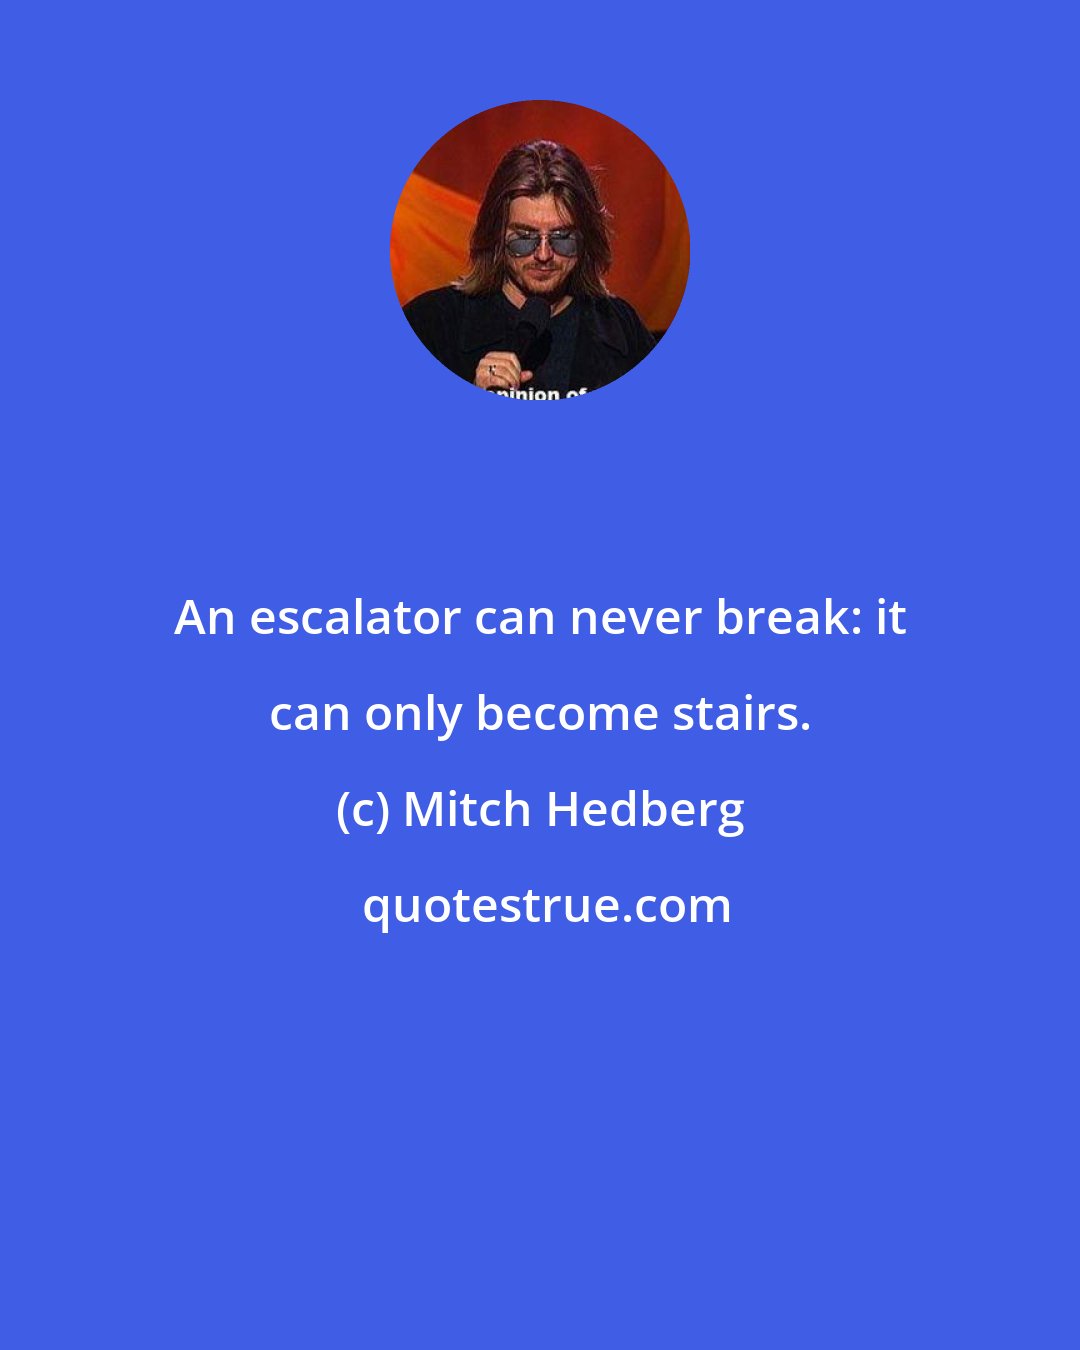 Mitch Hedberg: An escalator can never break: it can only become stairs.